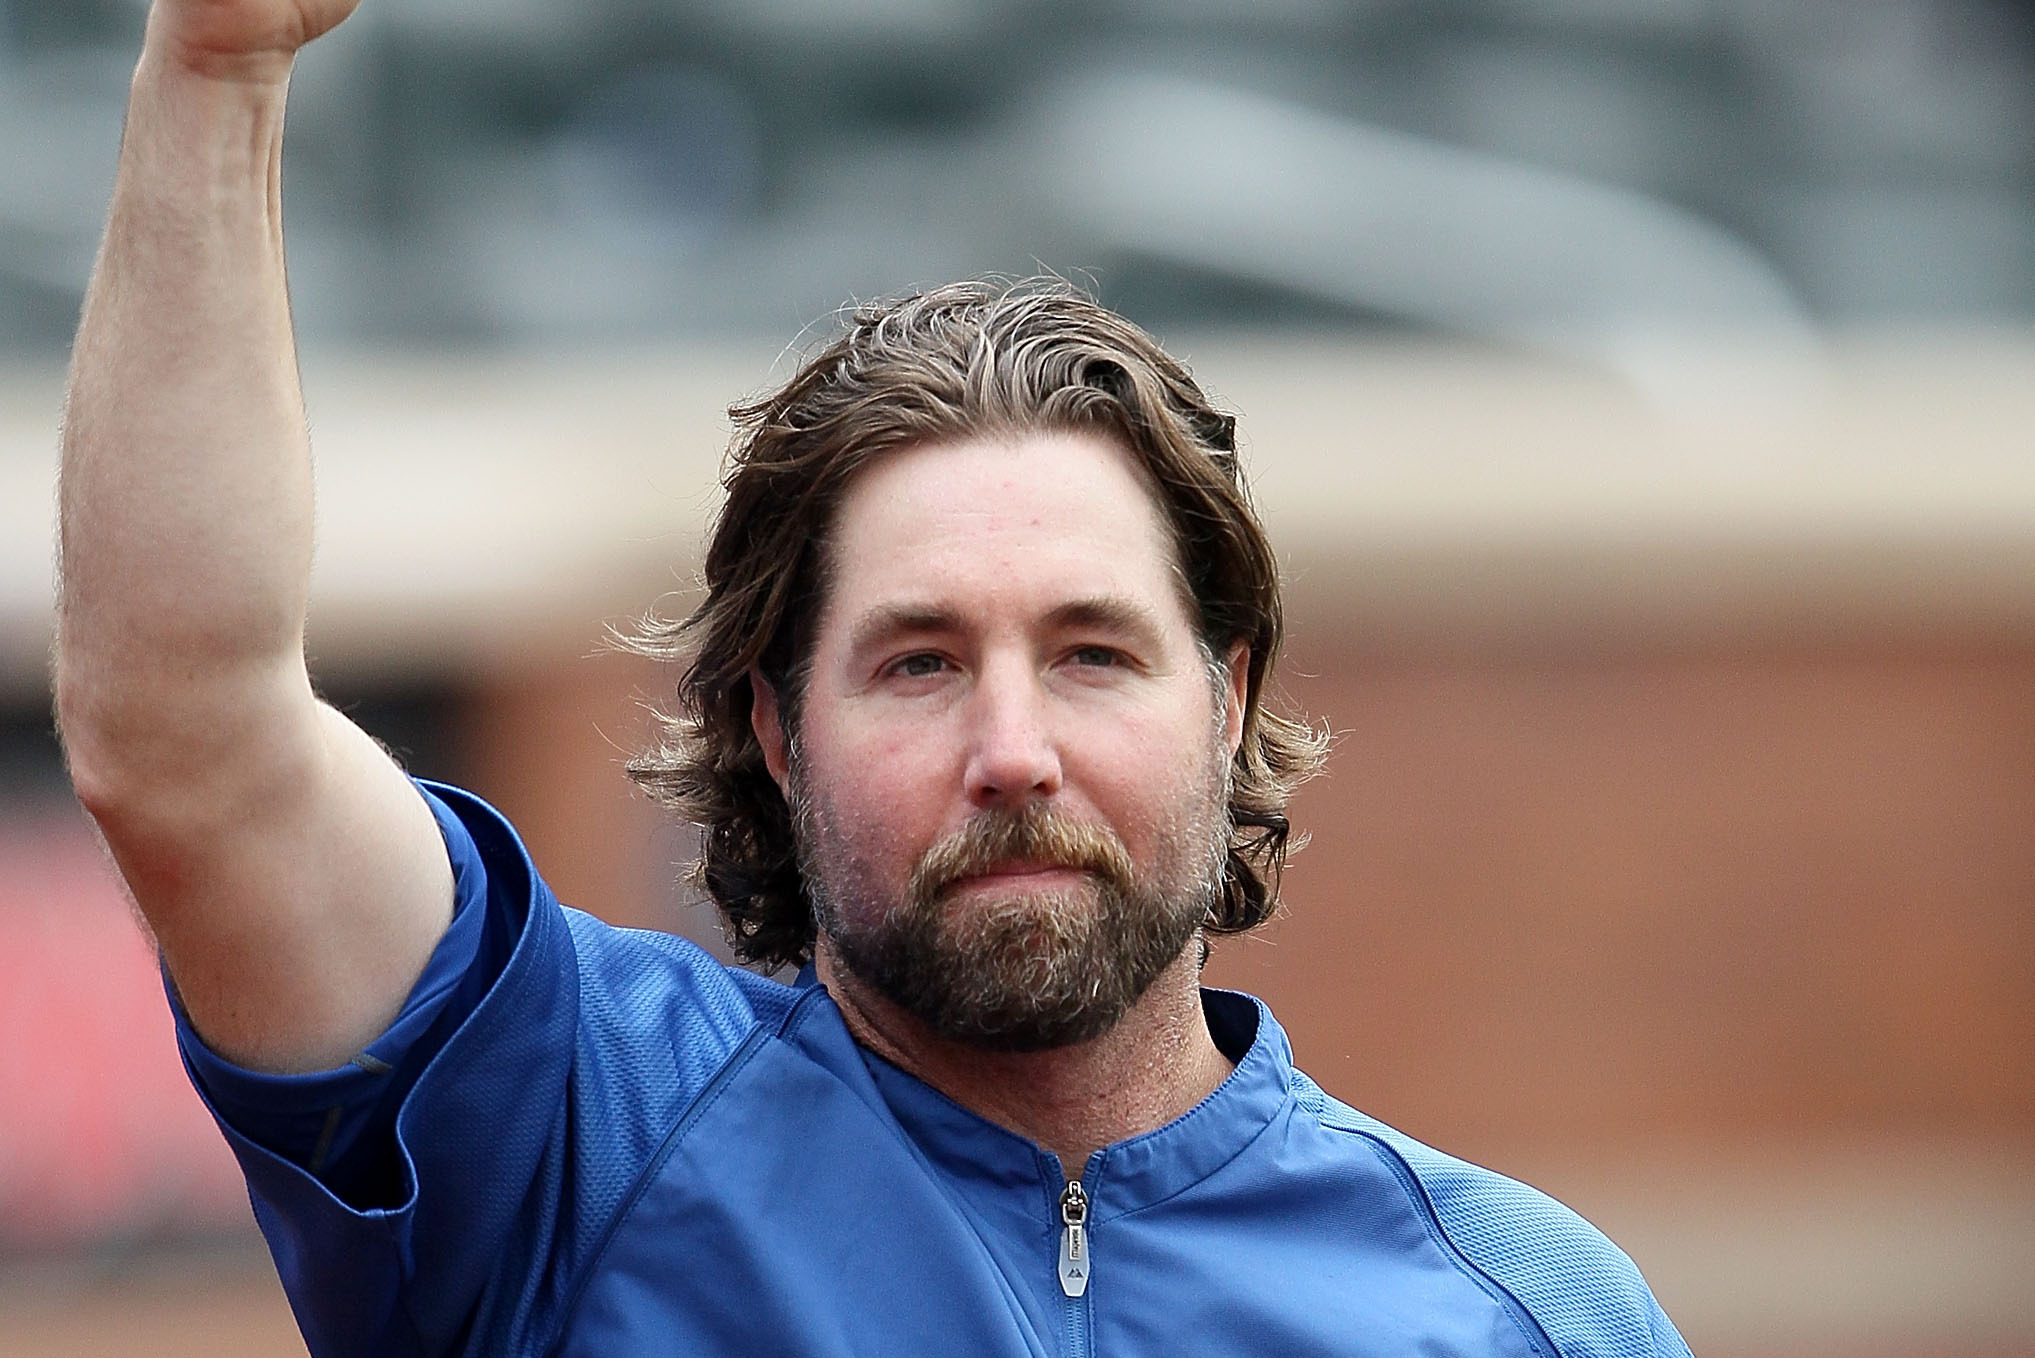 New York Mets' appeal of R.A. Dickey's one-hitter stinks – The